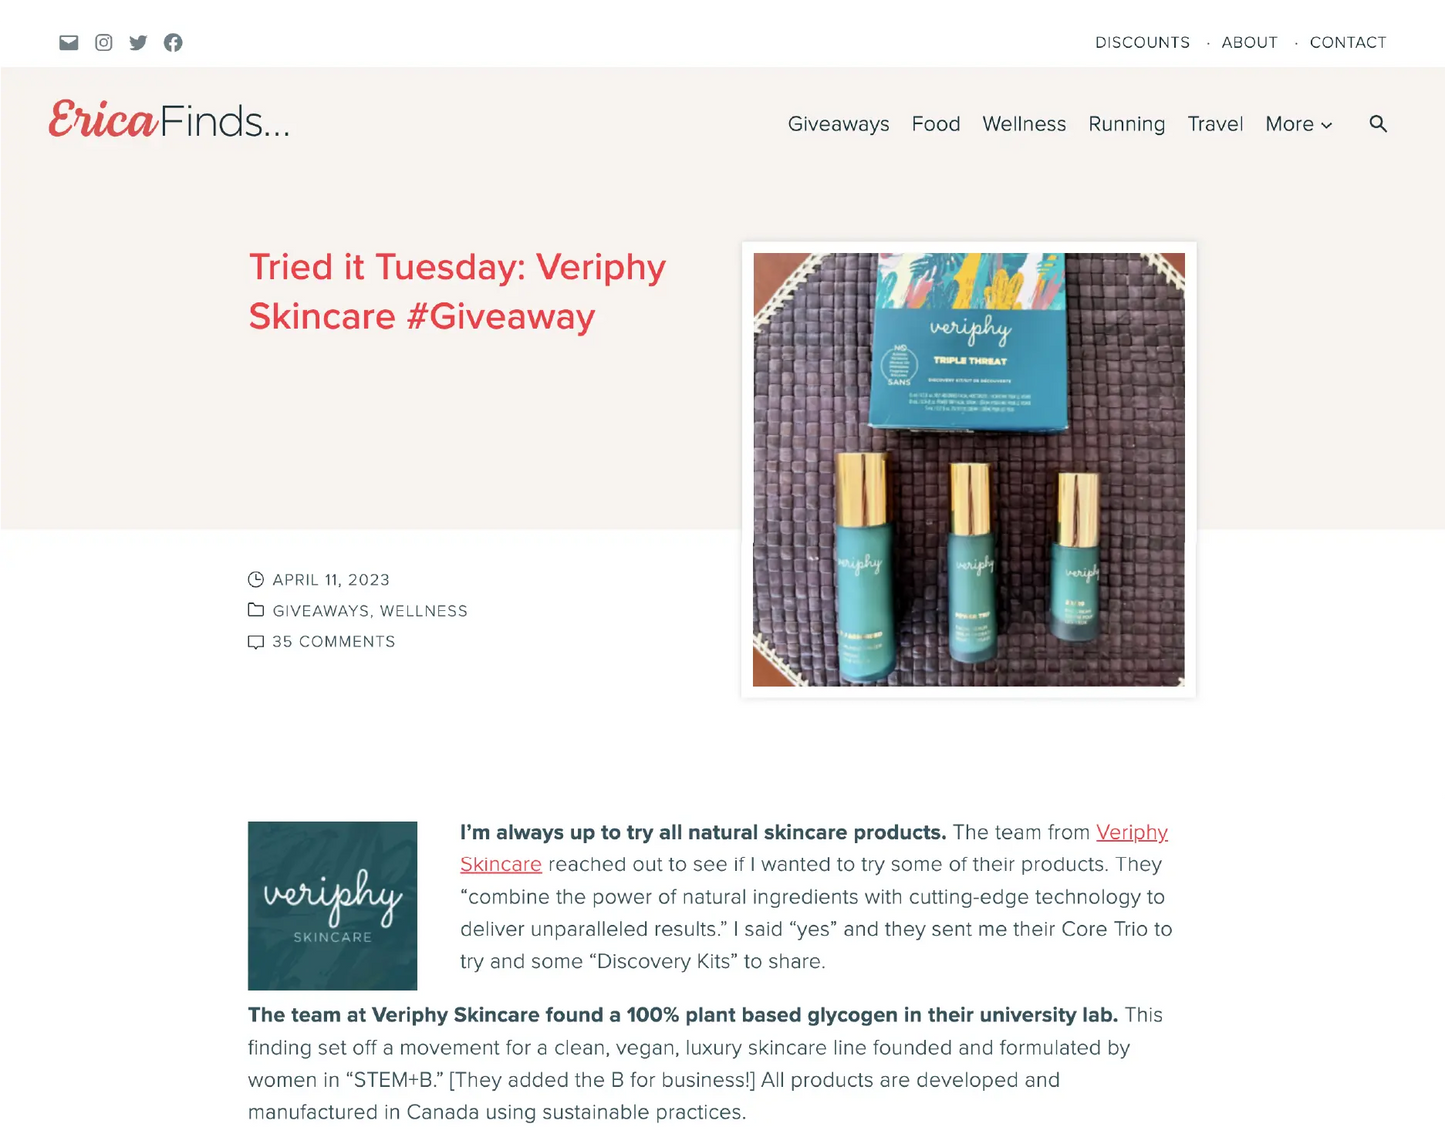 Veriphy Skincare Featured In Erica Finds Blog